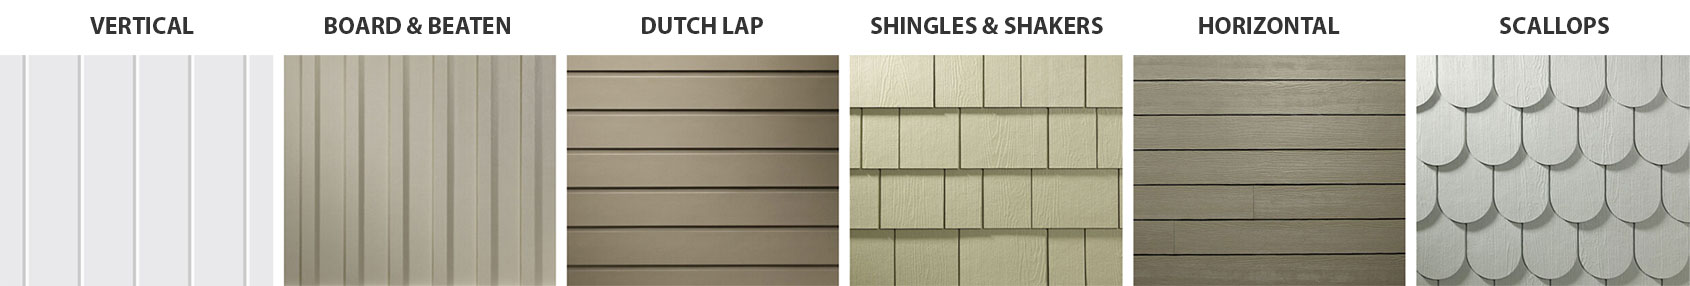 Commercial & Residential Siding Types